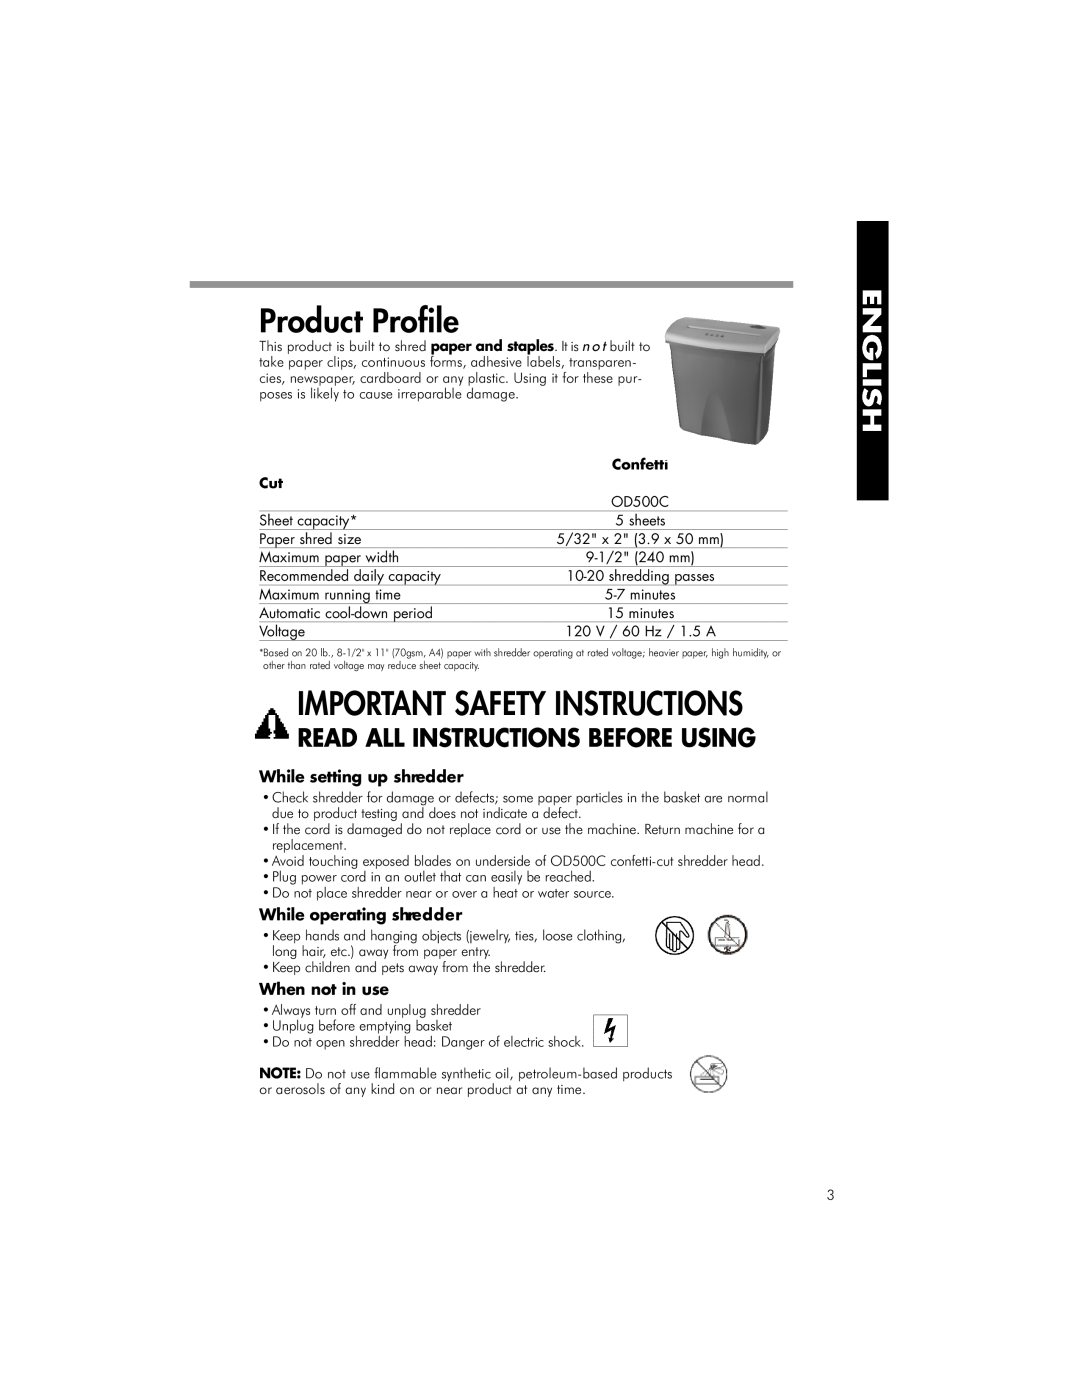 Fellowes OD500C manual Product Profile, Important Safety Instructions, While setting up shredder, While operating shredder 